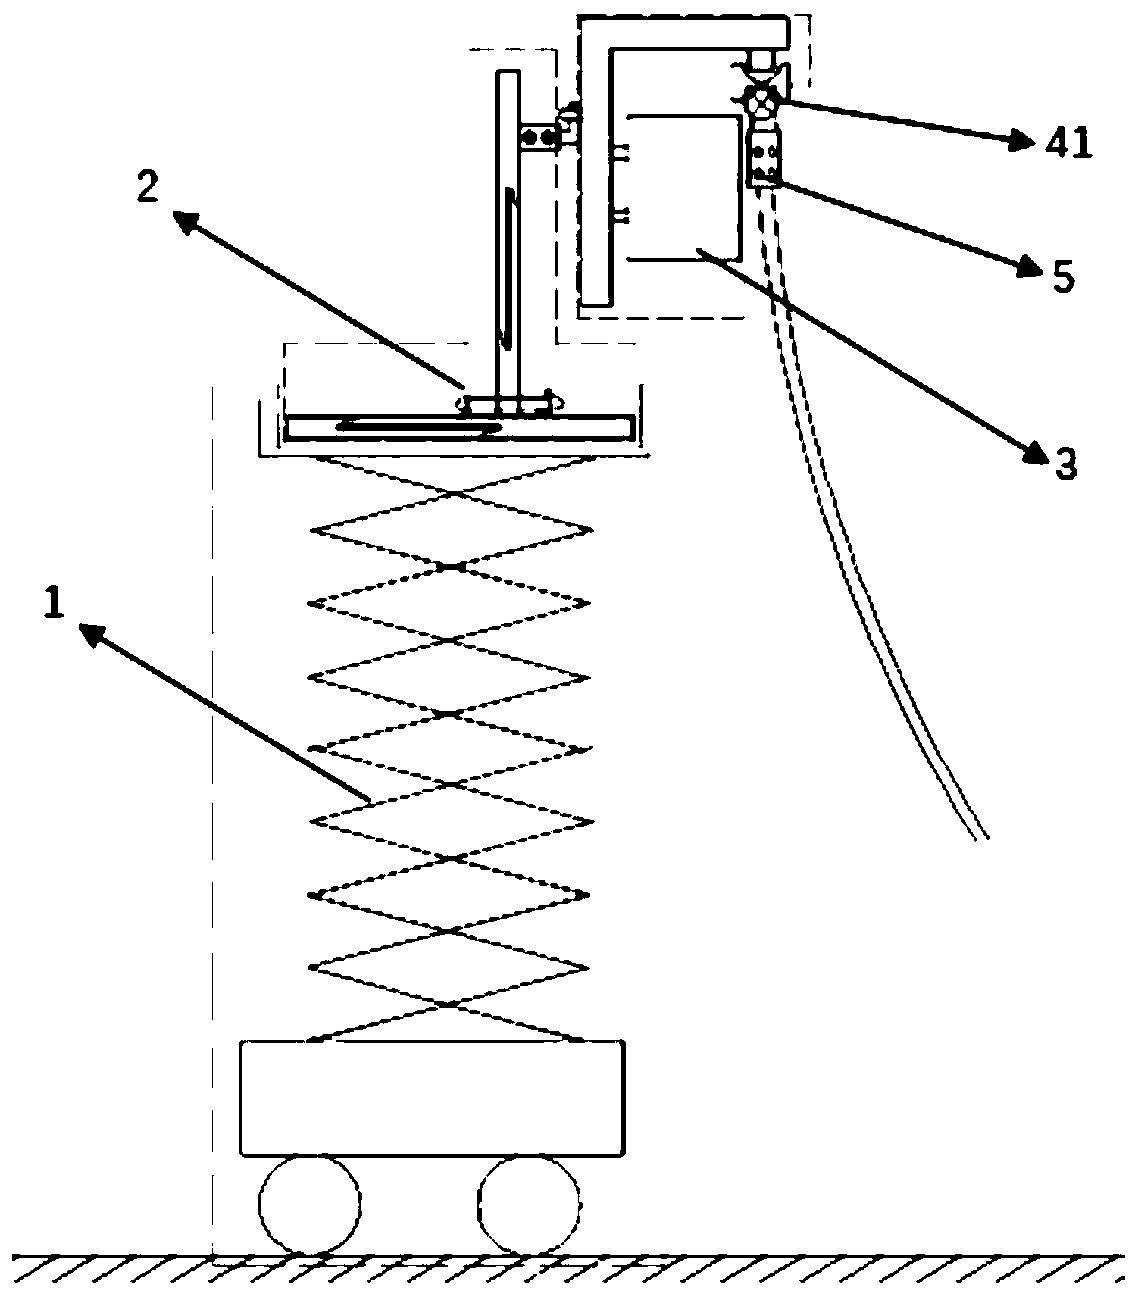 Device for dismounting high-voltage line T-shaped clamp in hot-line work